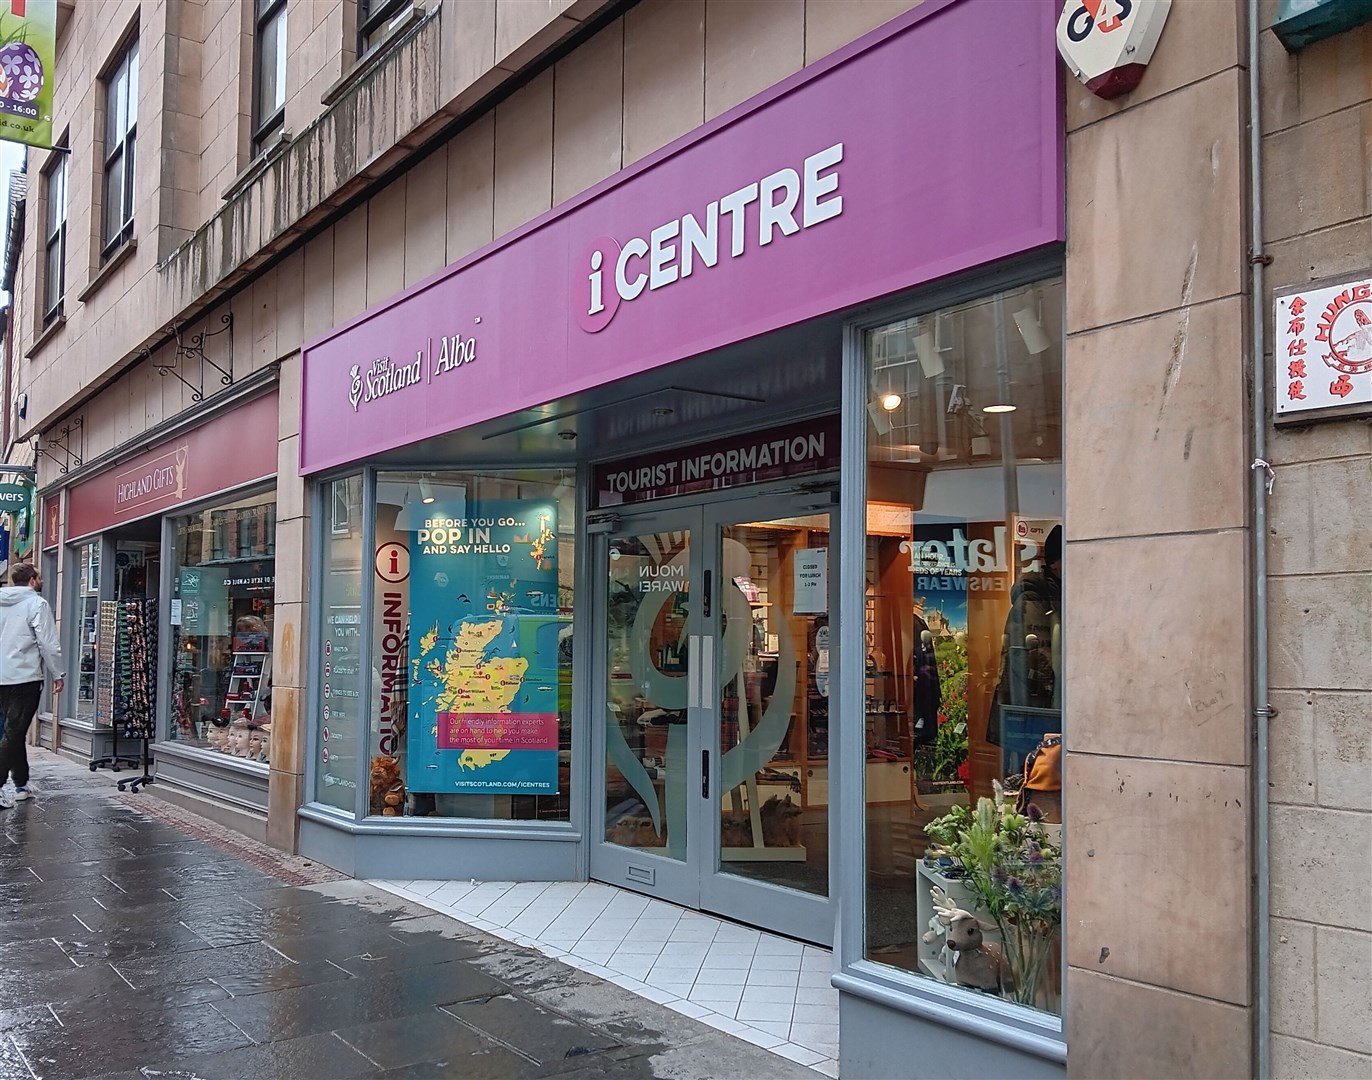 VisitScotland has announced its network of information centres will close over the next two years.